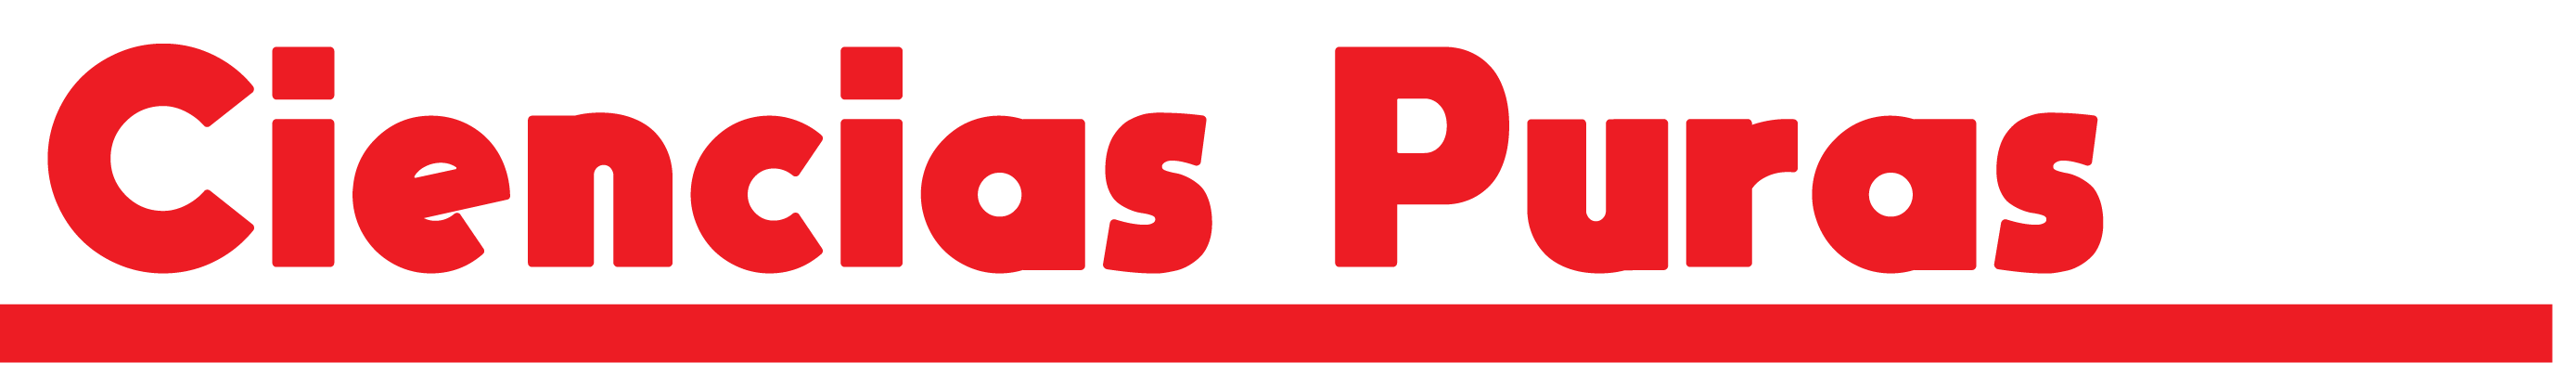 cp-35.png